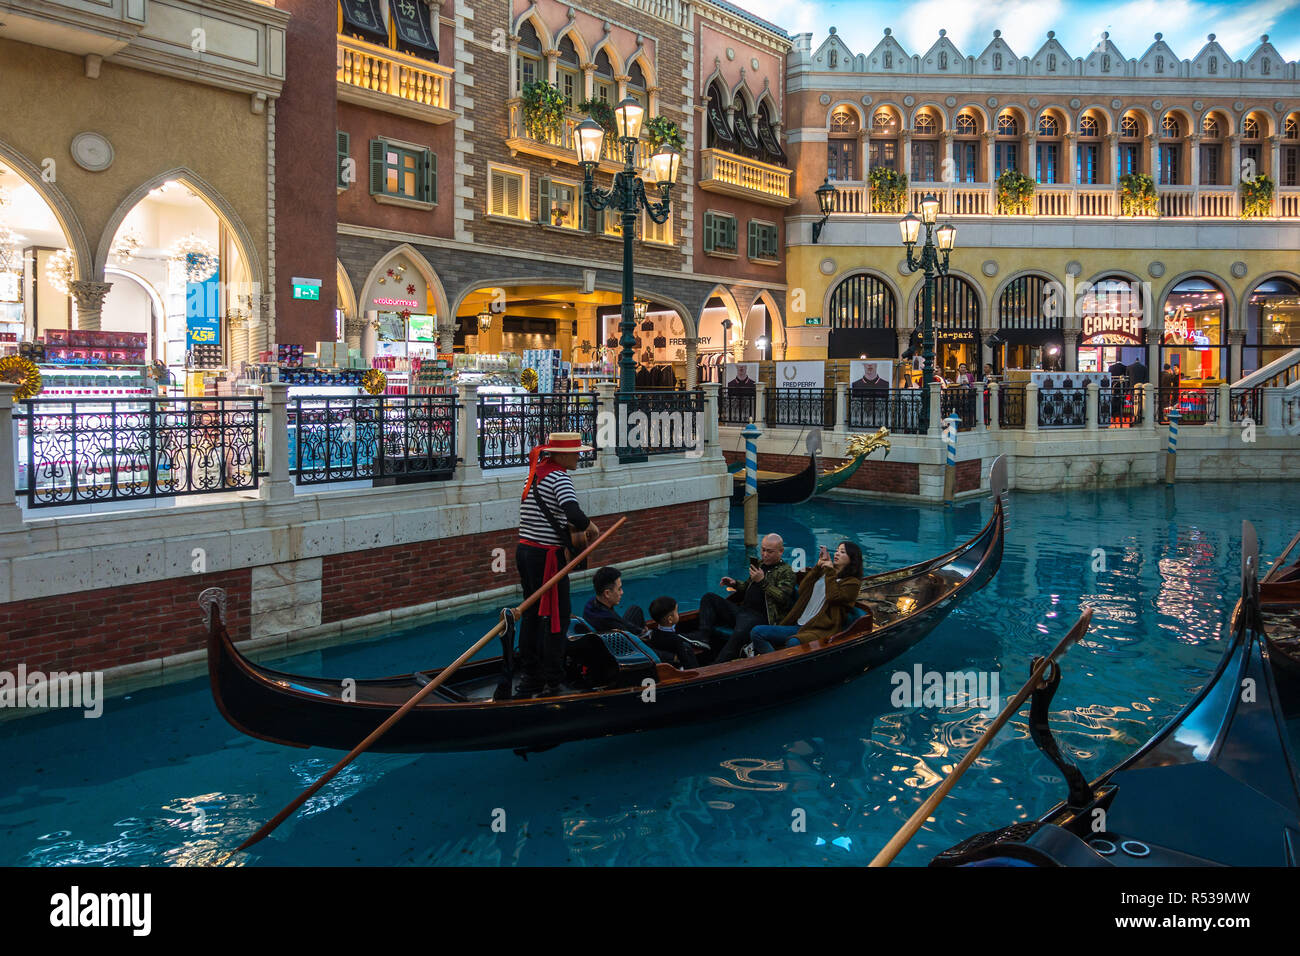 Tourists riding on the Gondola along artificial canal of the Venetian Macau, the largest casino in the world and luxury hotel. Macau, January 2018 Stock Photo